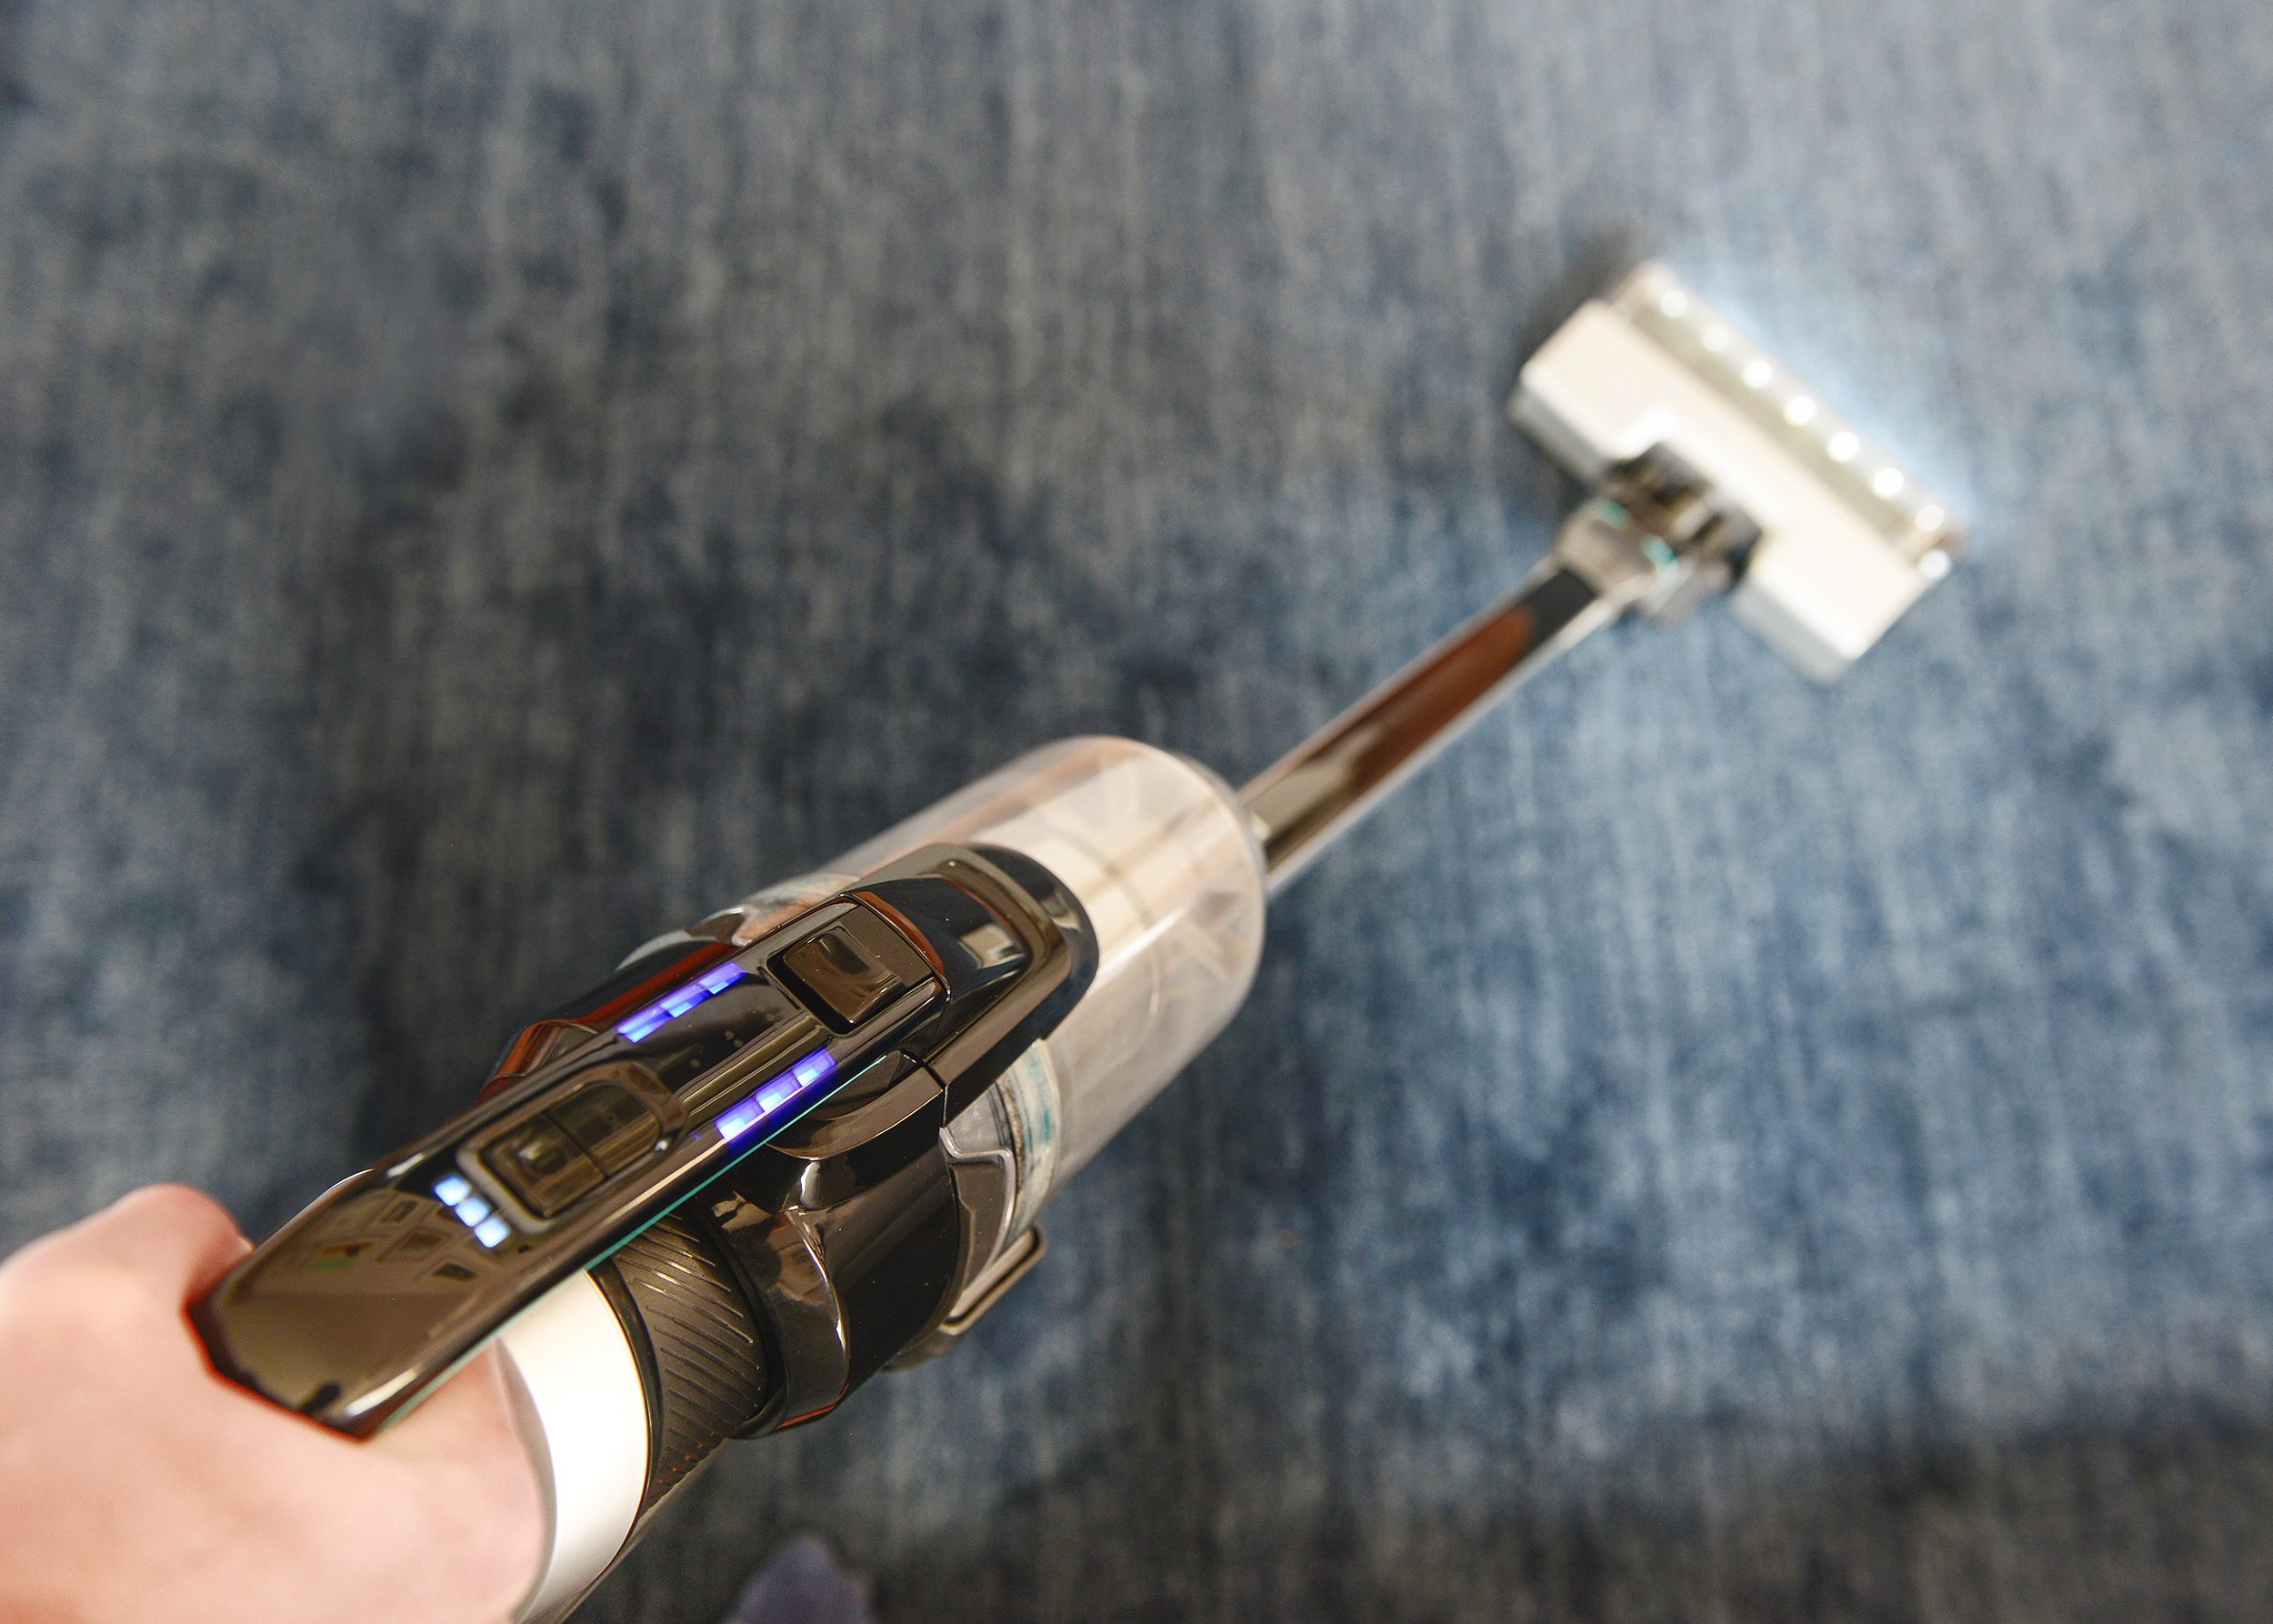 How we use the BISSELL ICONpet cordless vacuum to keep pet hair and messes to a minimum | via Yellow Brick Home #BISSELL #pethappens